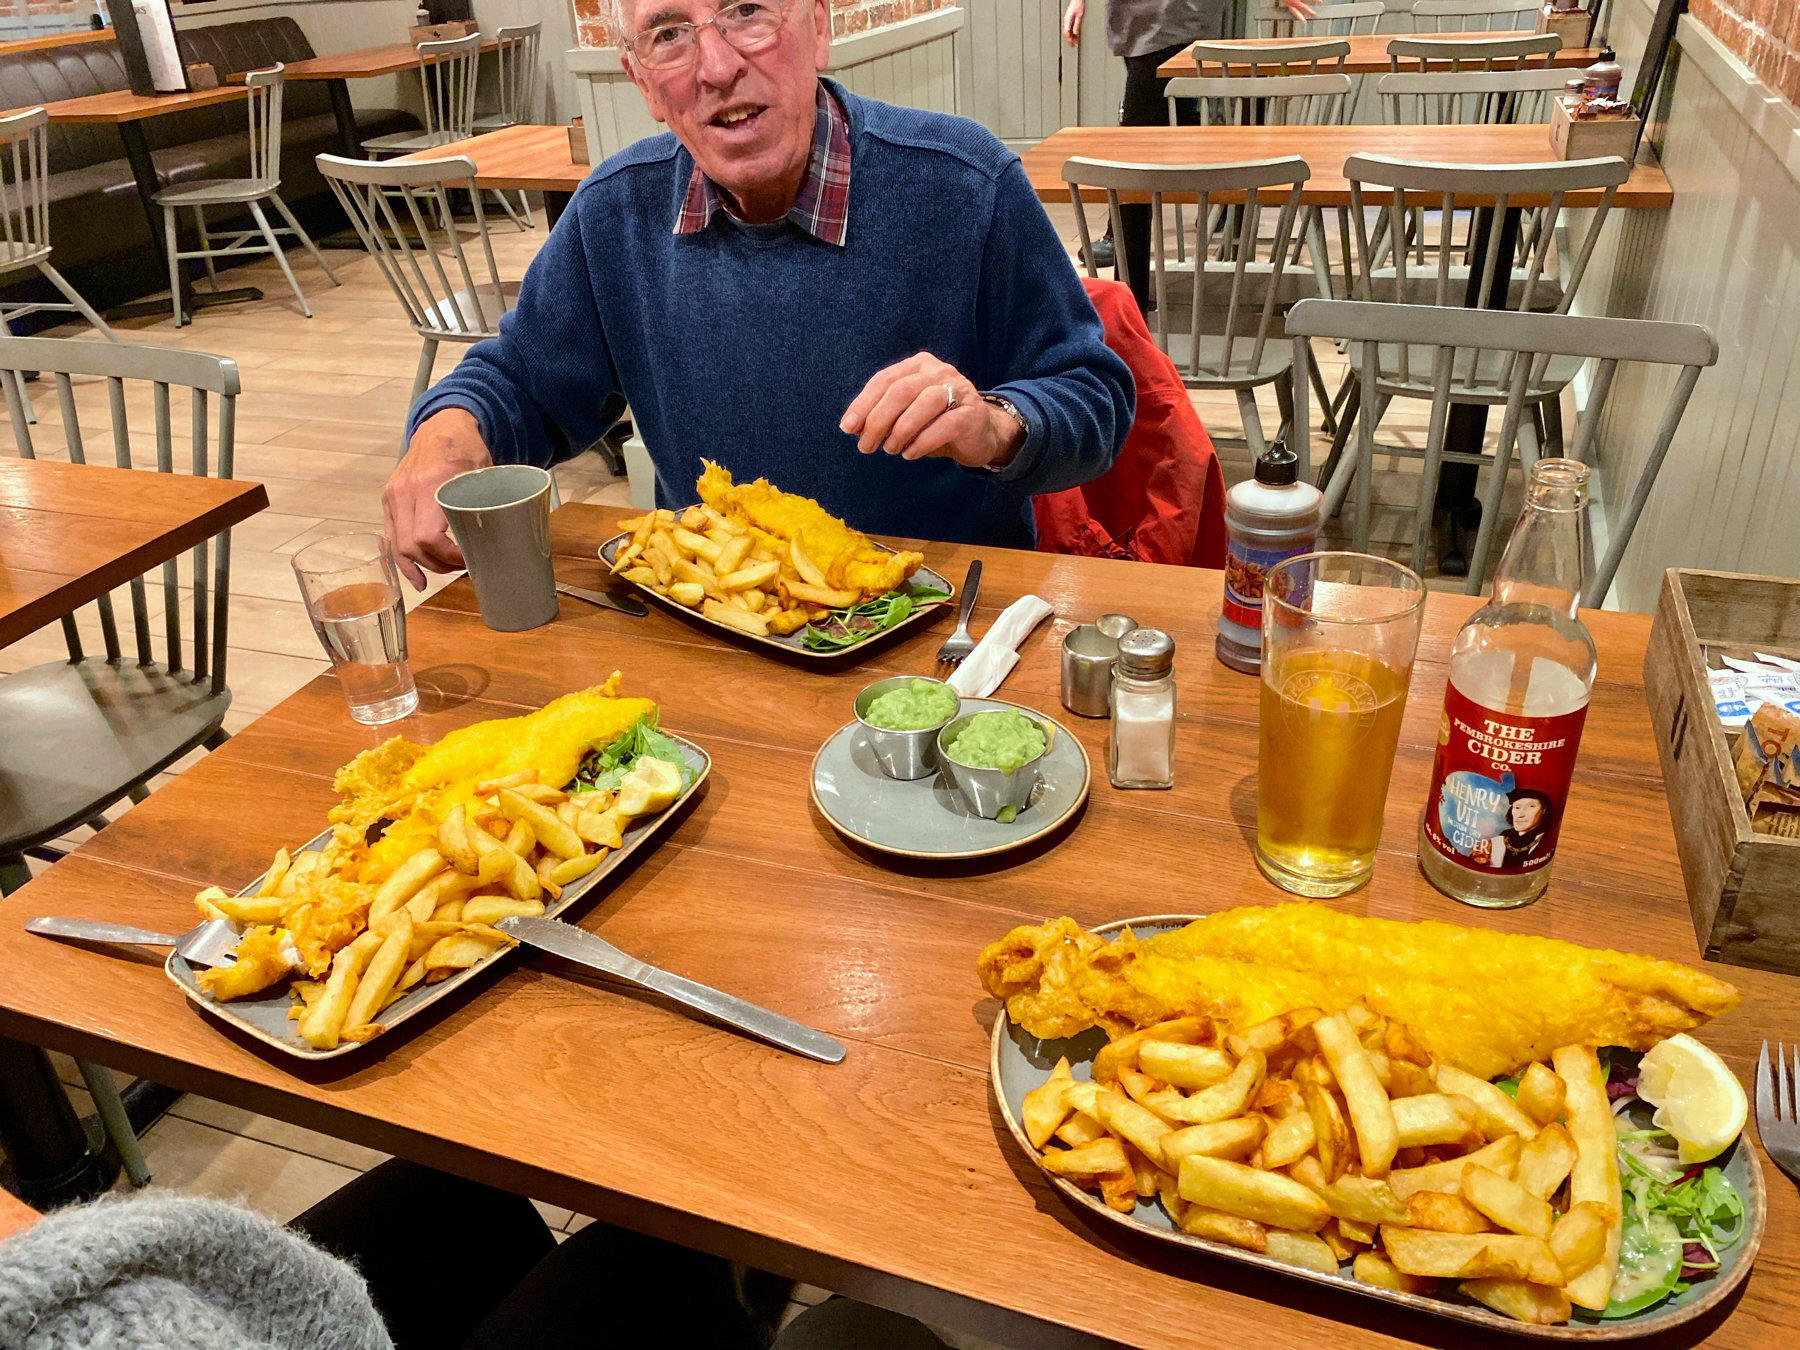 Cafe table with three plates of fish and chips and drinks, man sitting at far side of table